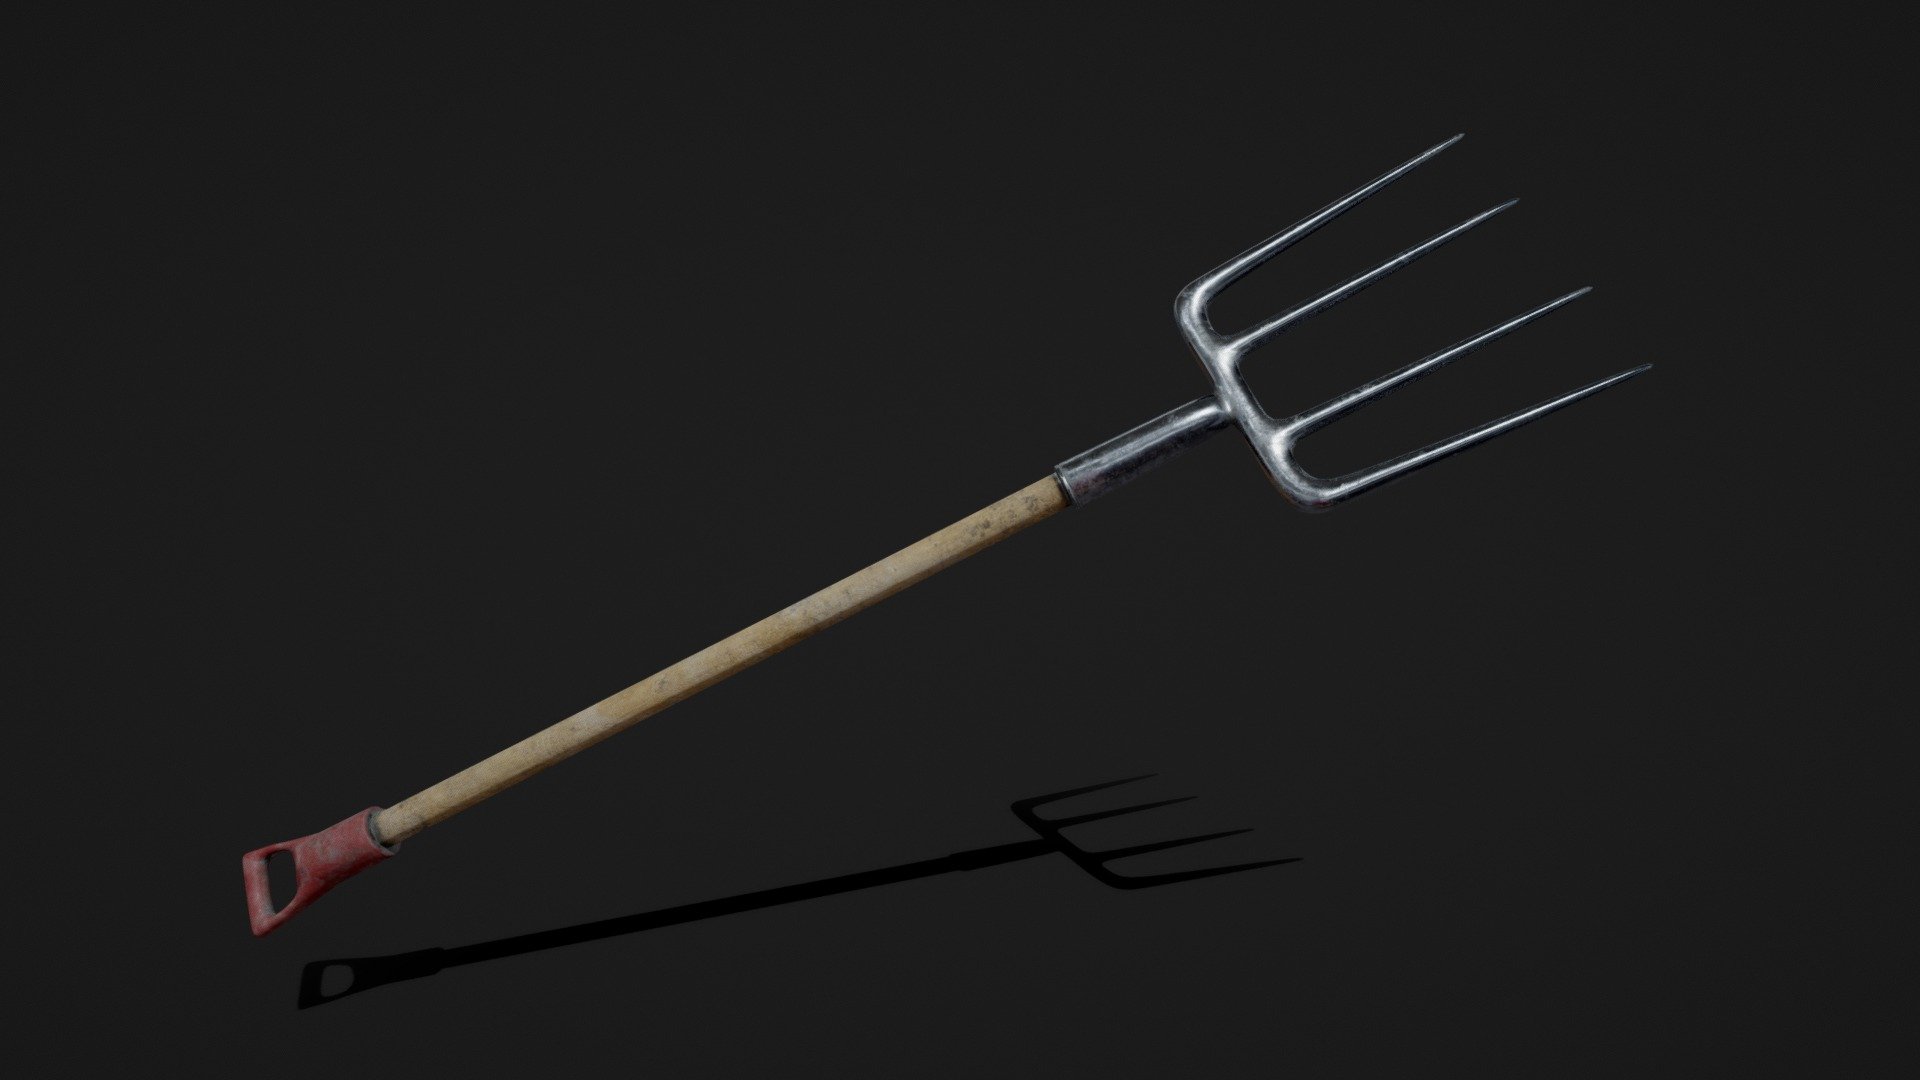 how do you caption something as simple as a pitchfork?
I don't know, scoop some hay?
Start an angry mob?
Its a pitch.
A Fork.
A Friend?
Find out more at 6. The nightly news.
Game Ready
4k textures
Badabing
badaboom - Pitchfork - Buy Royalty Free 3D model by Isaack - Tacko The 3D Guy (@isaackgamma) 3d model